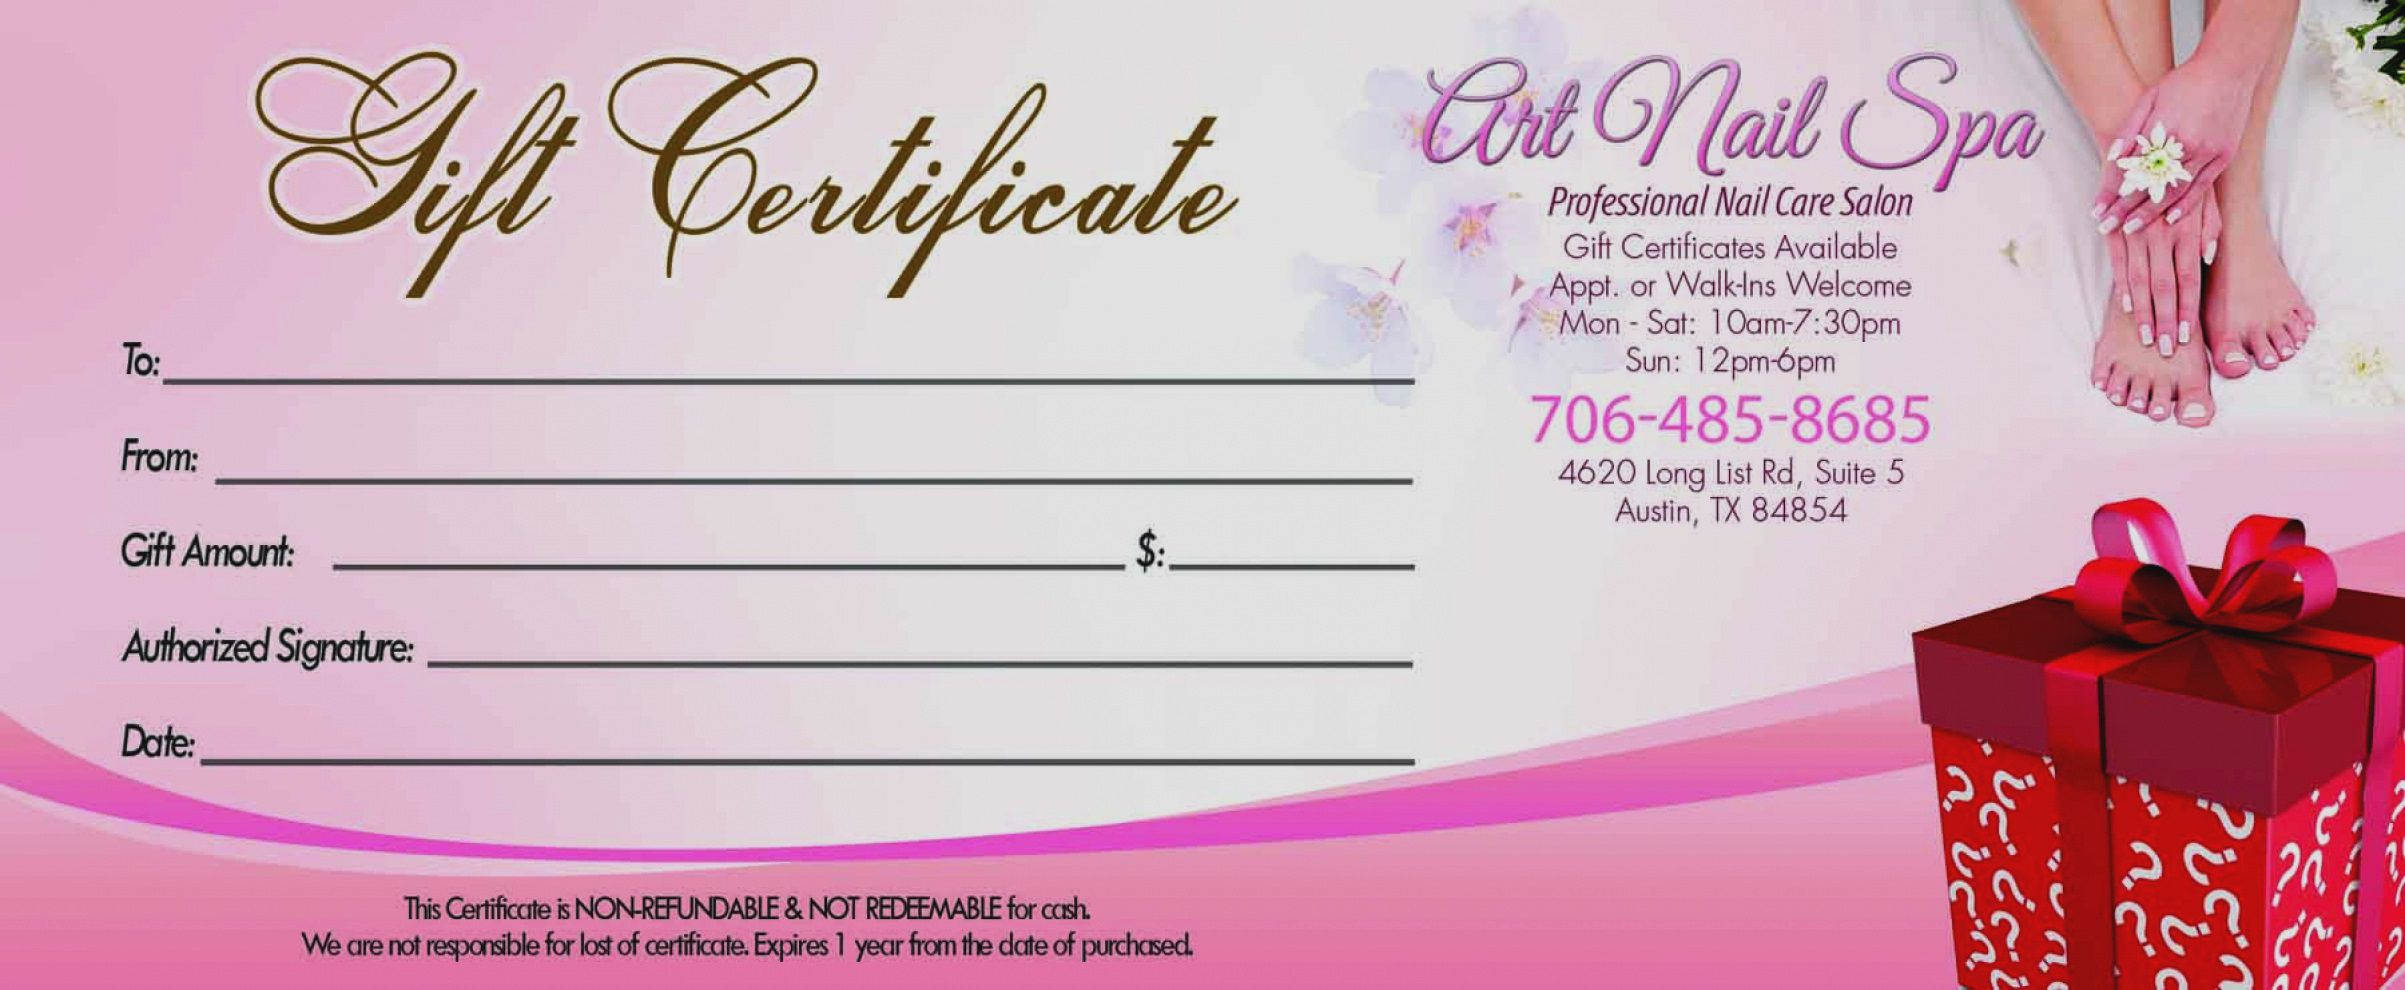 salon-gift-certificate-templates-addictionary-within-printable